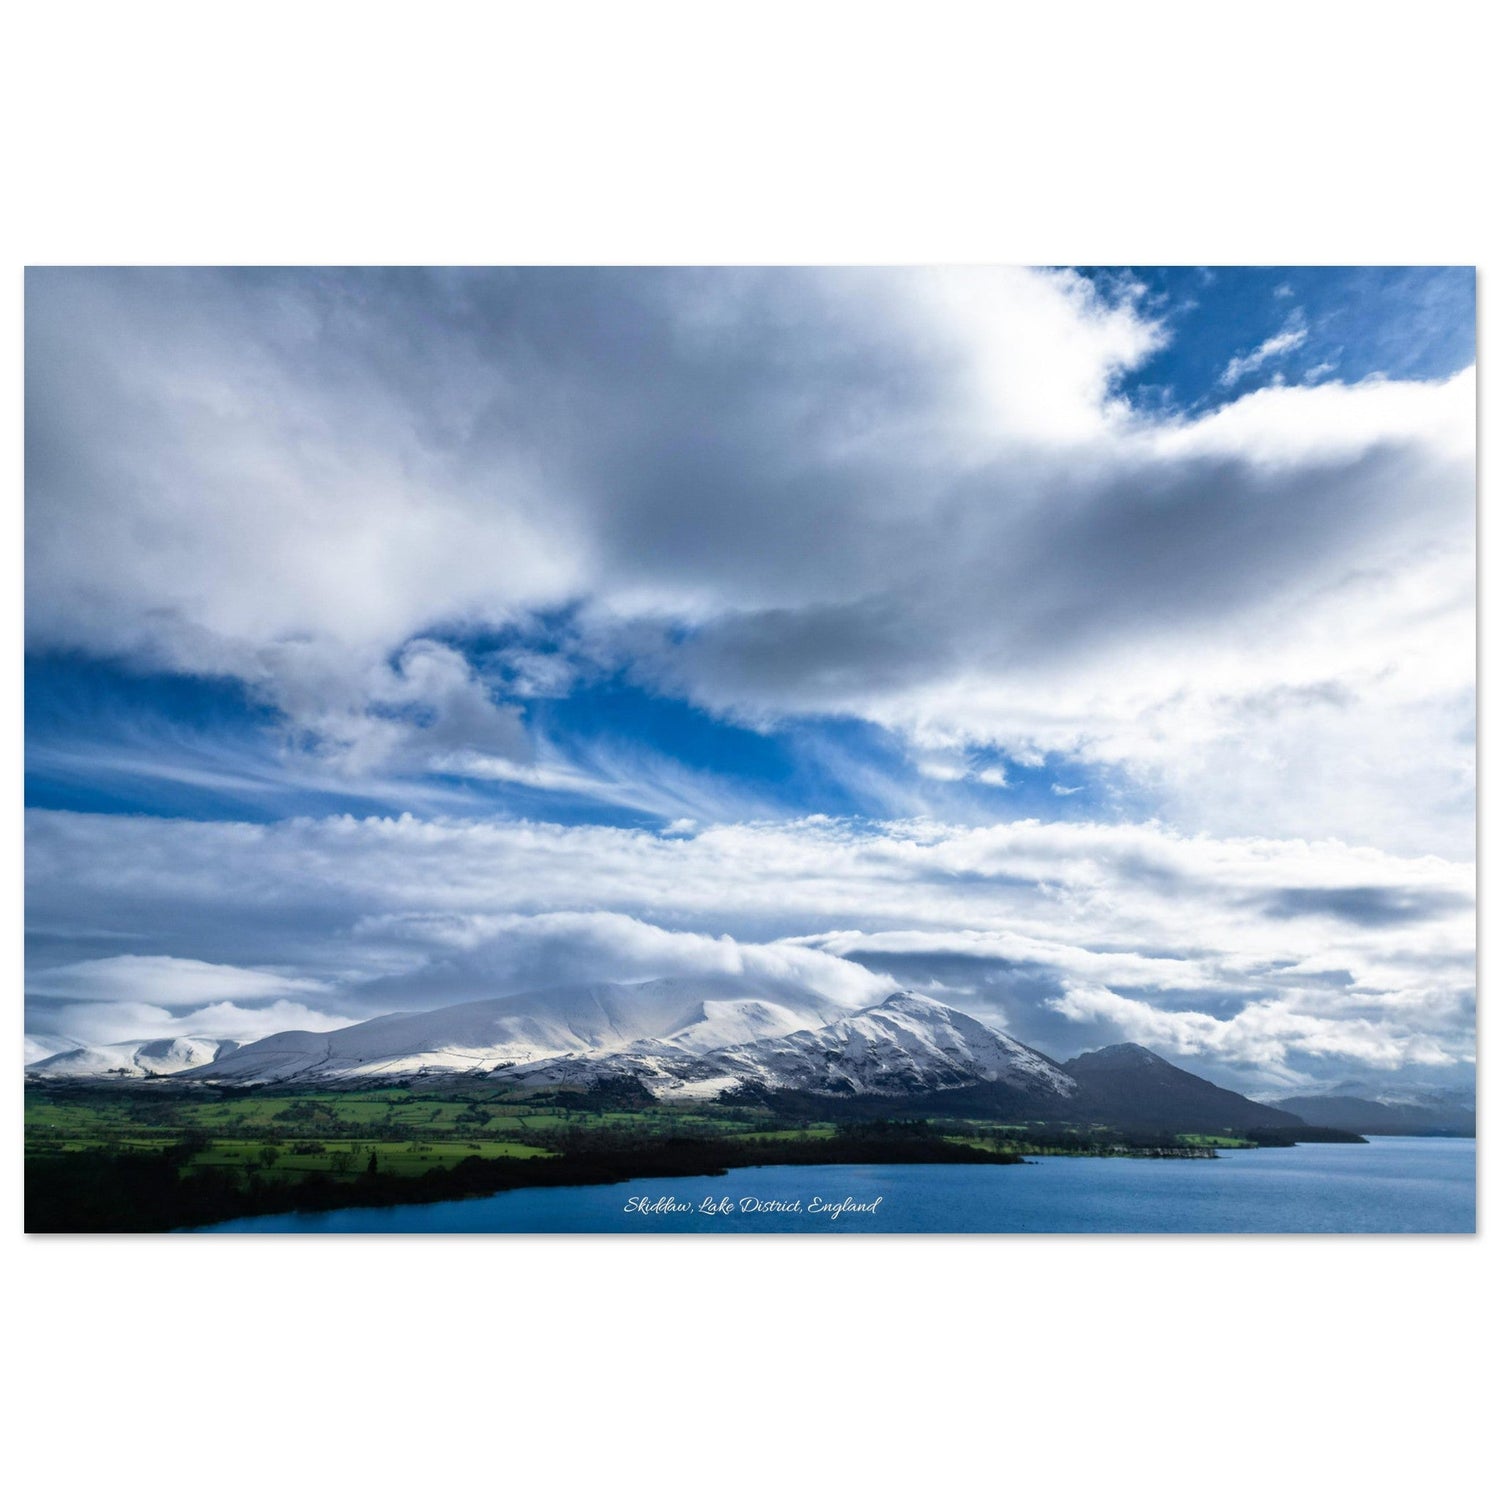 20x30 cm / 8x12″ Aluminum Print Skiddaw - Lake District - Mountain Wall Art by Picture This